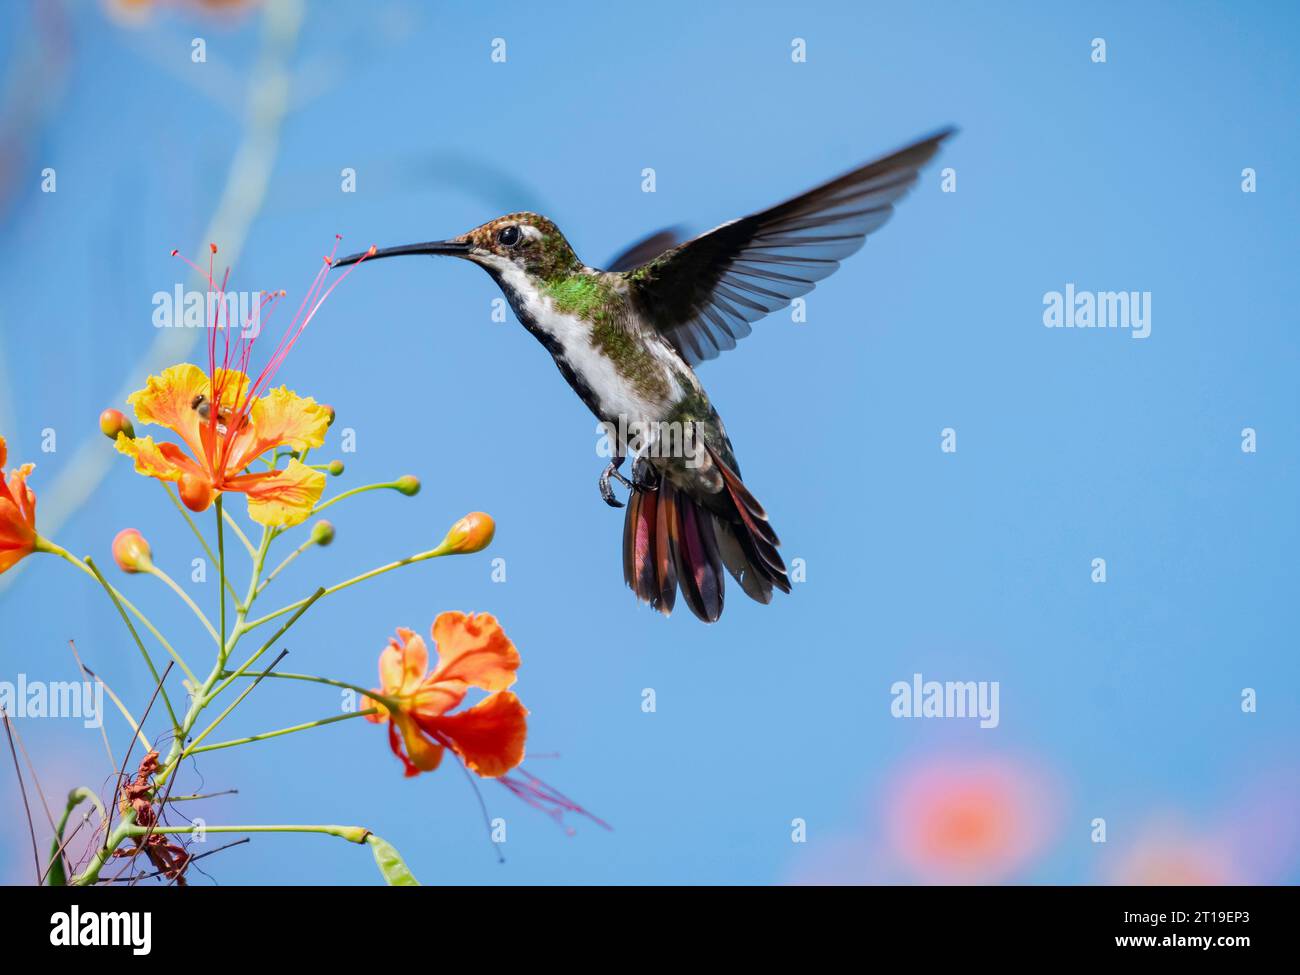 Black-throated Mango hummingbird, Anthracothorax nigricollis, flying in blue sky with tail flared next to tropical orange flowers Stock Photo